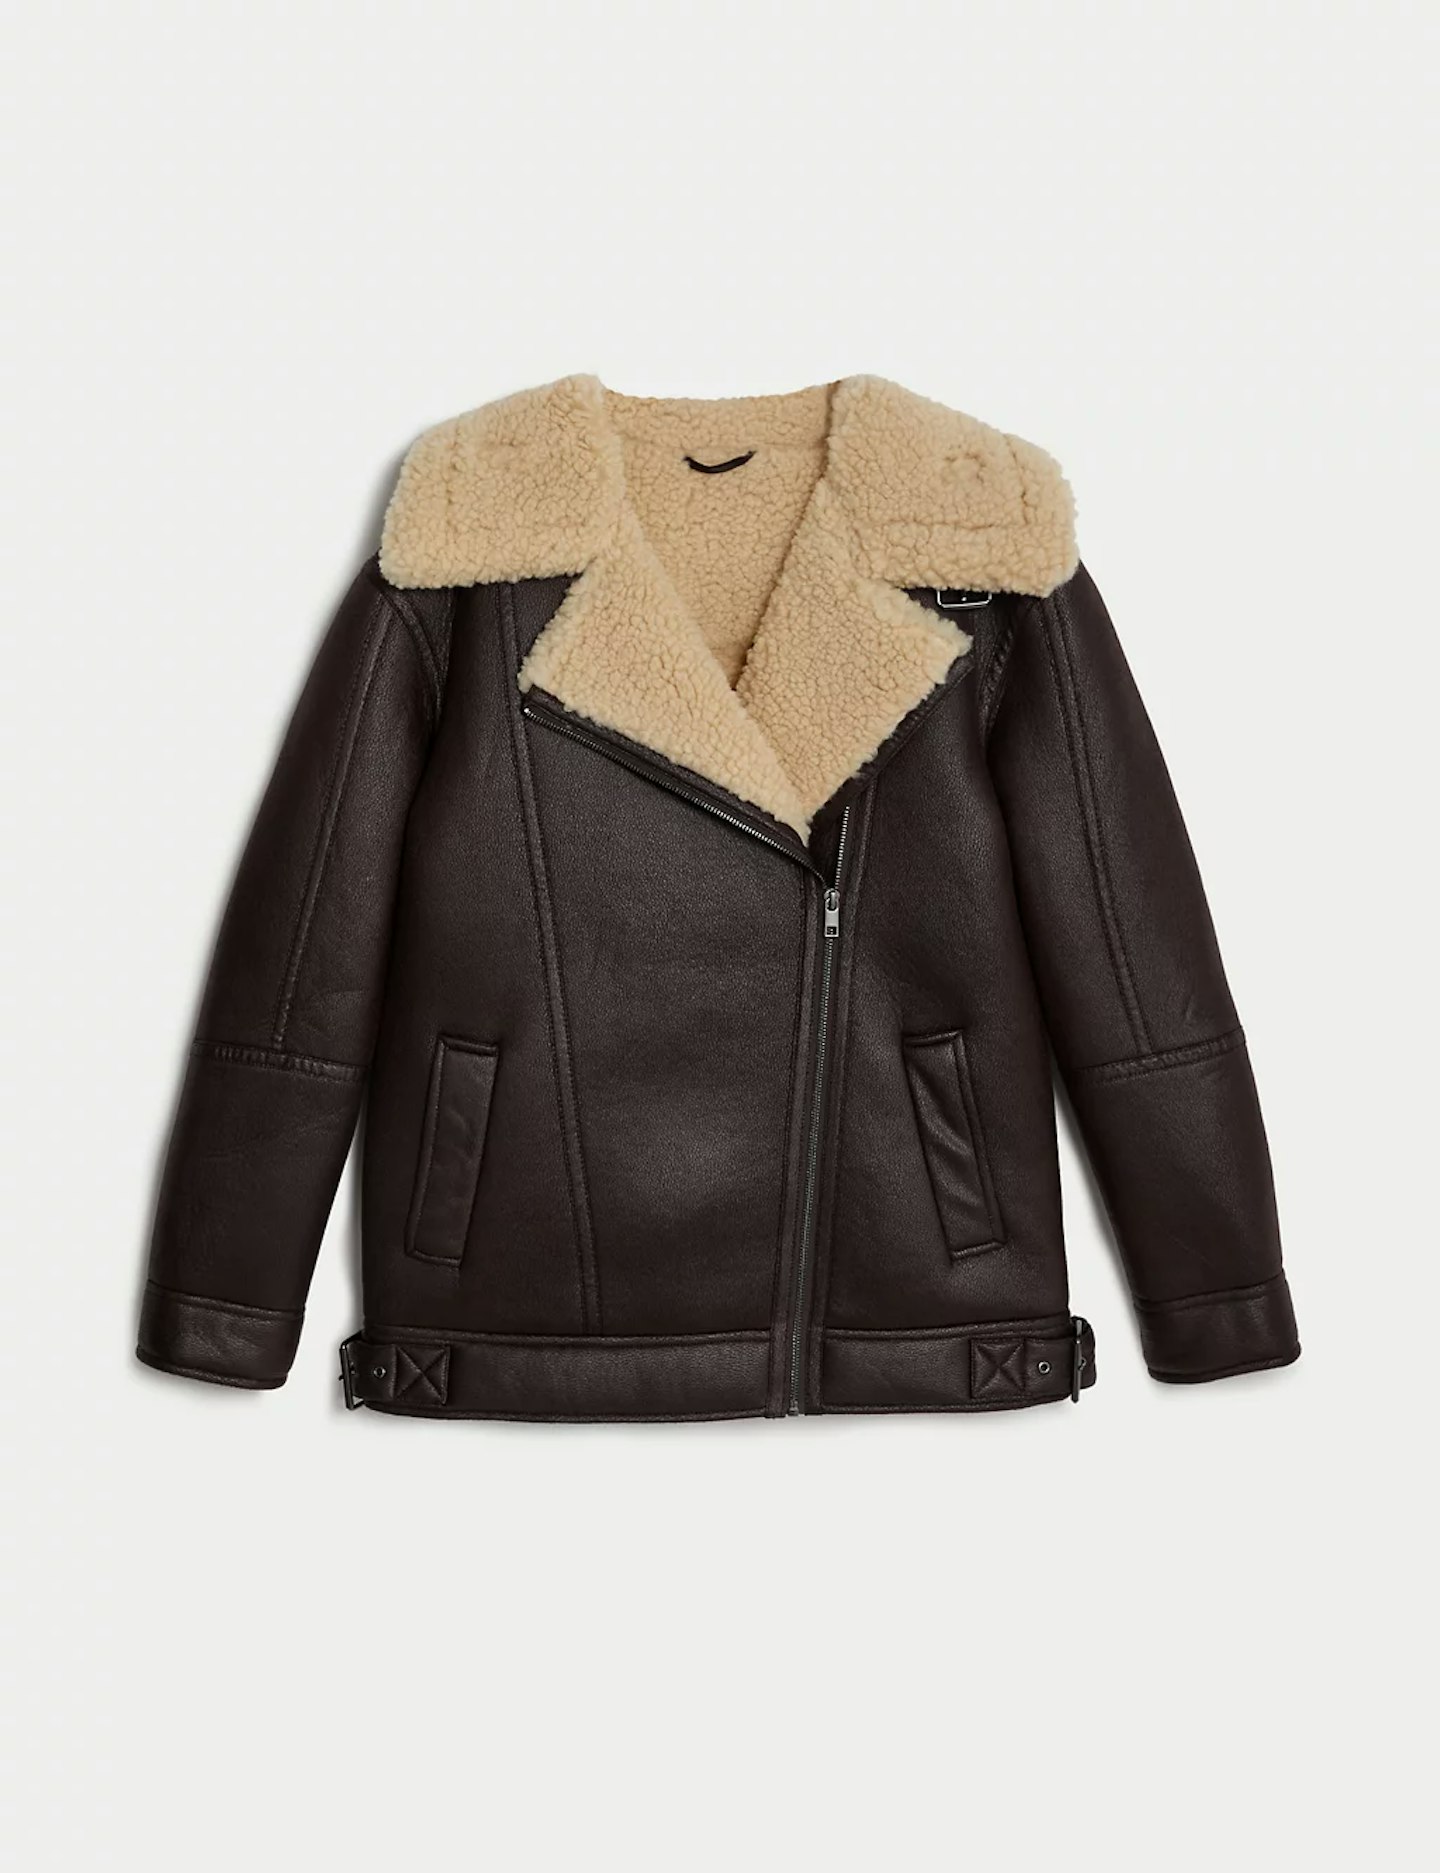 M&S, Faux-Shearling Borg-Lined Aviator Jacket